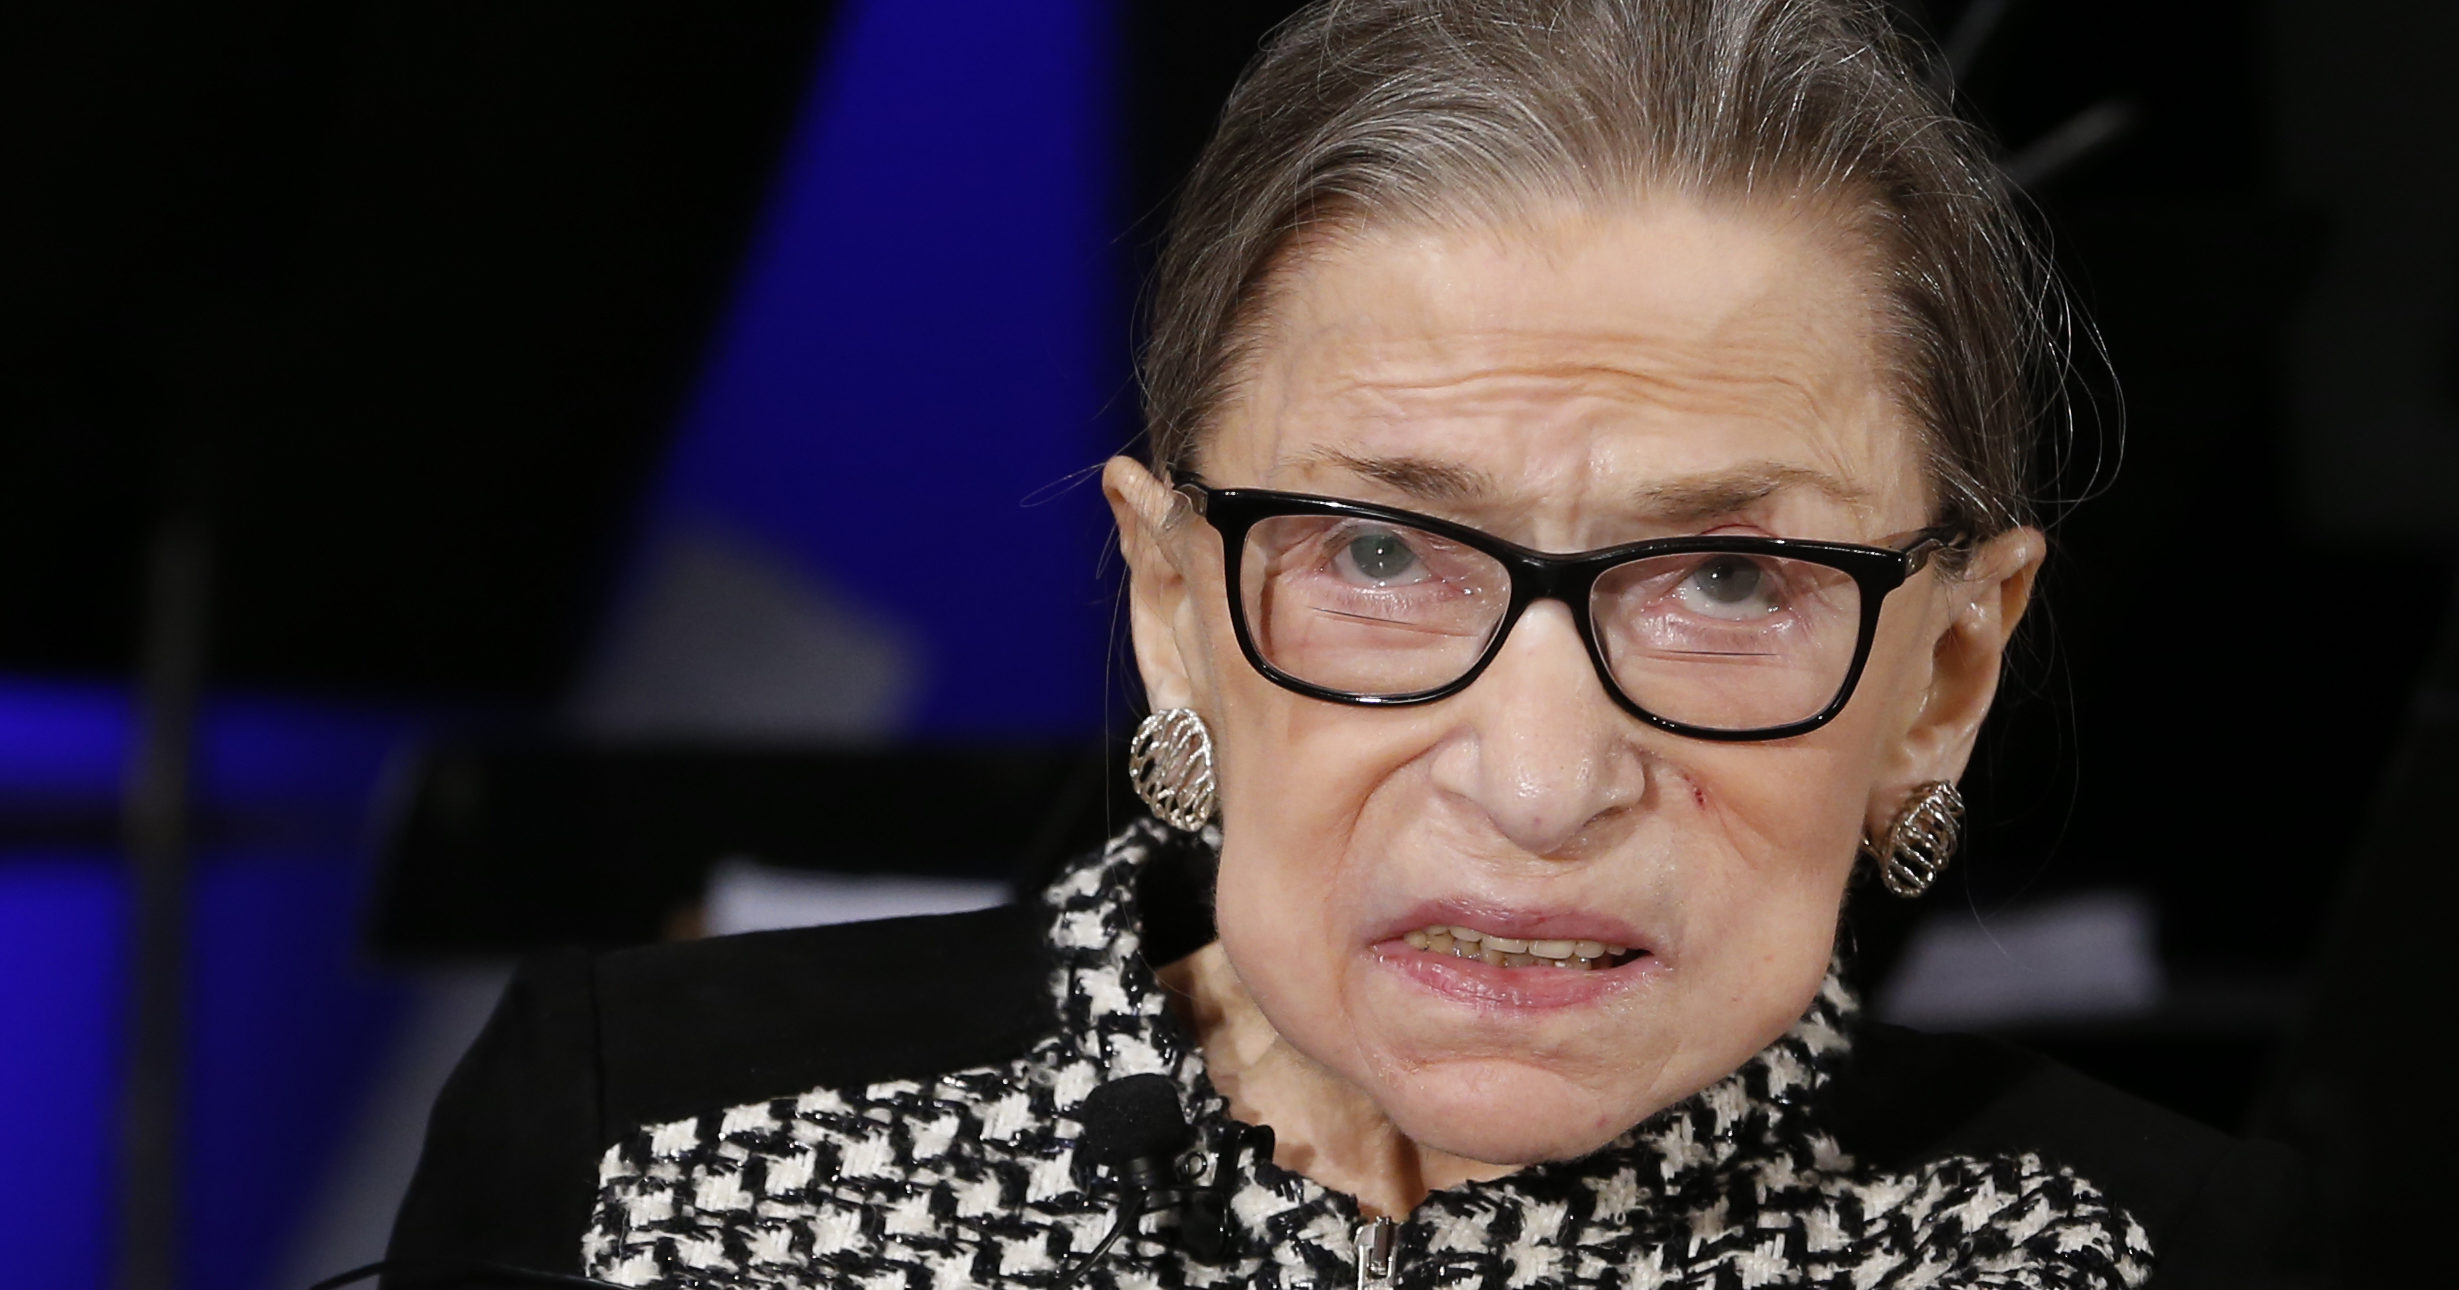 In this Dec. 17, 2019, file photo, Supreme Court Justice Ruth Bader Ginsburg speaks at the National Museum of Women in the Arts in Washington, D.C.